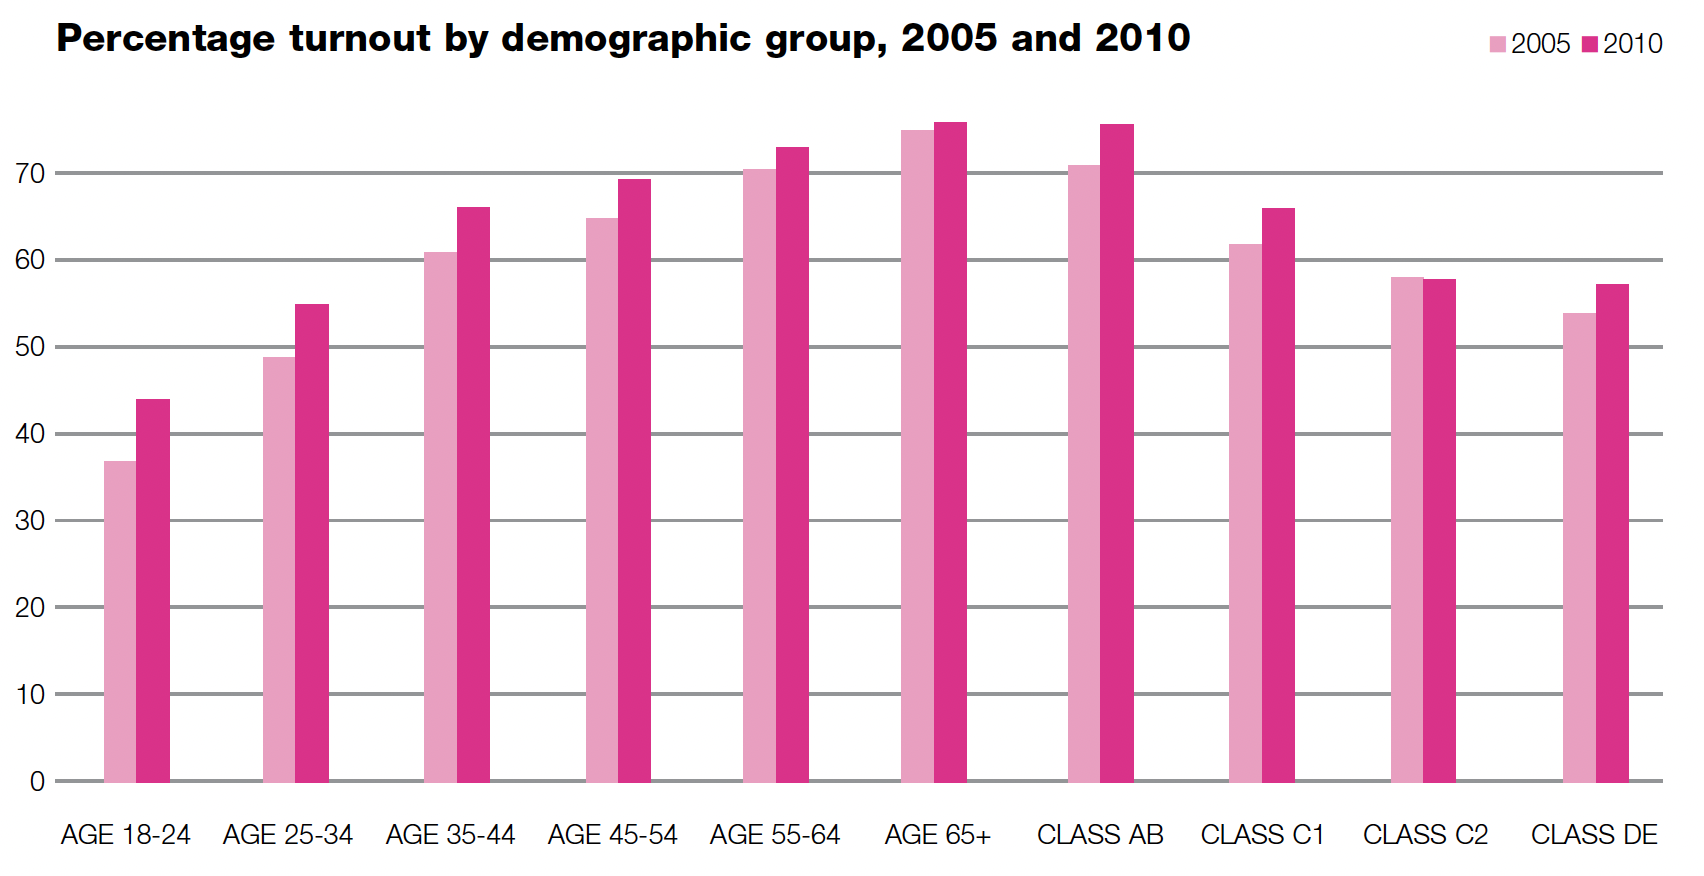 Percentage turnout by demographic group, 2005 and 2010